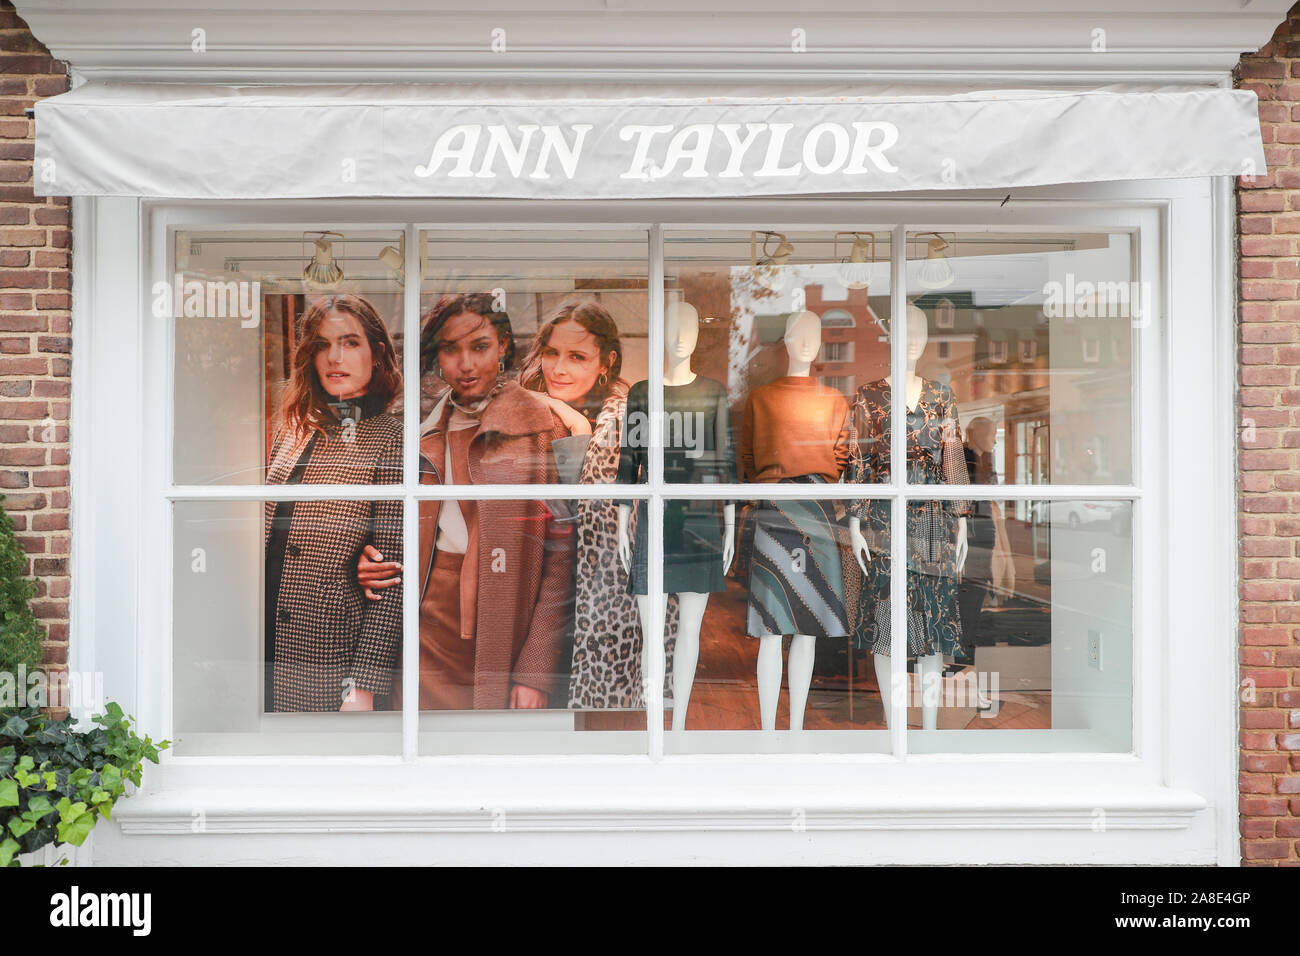 Princeton New Jersey November 11 2019:ANN TAYLOR mall retail shop location with sign - Image Stock Photo